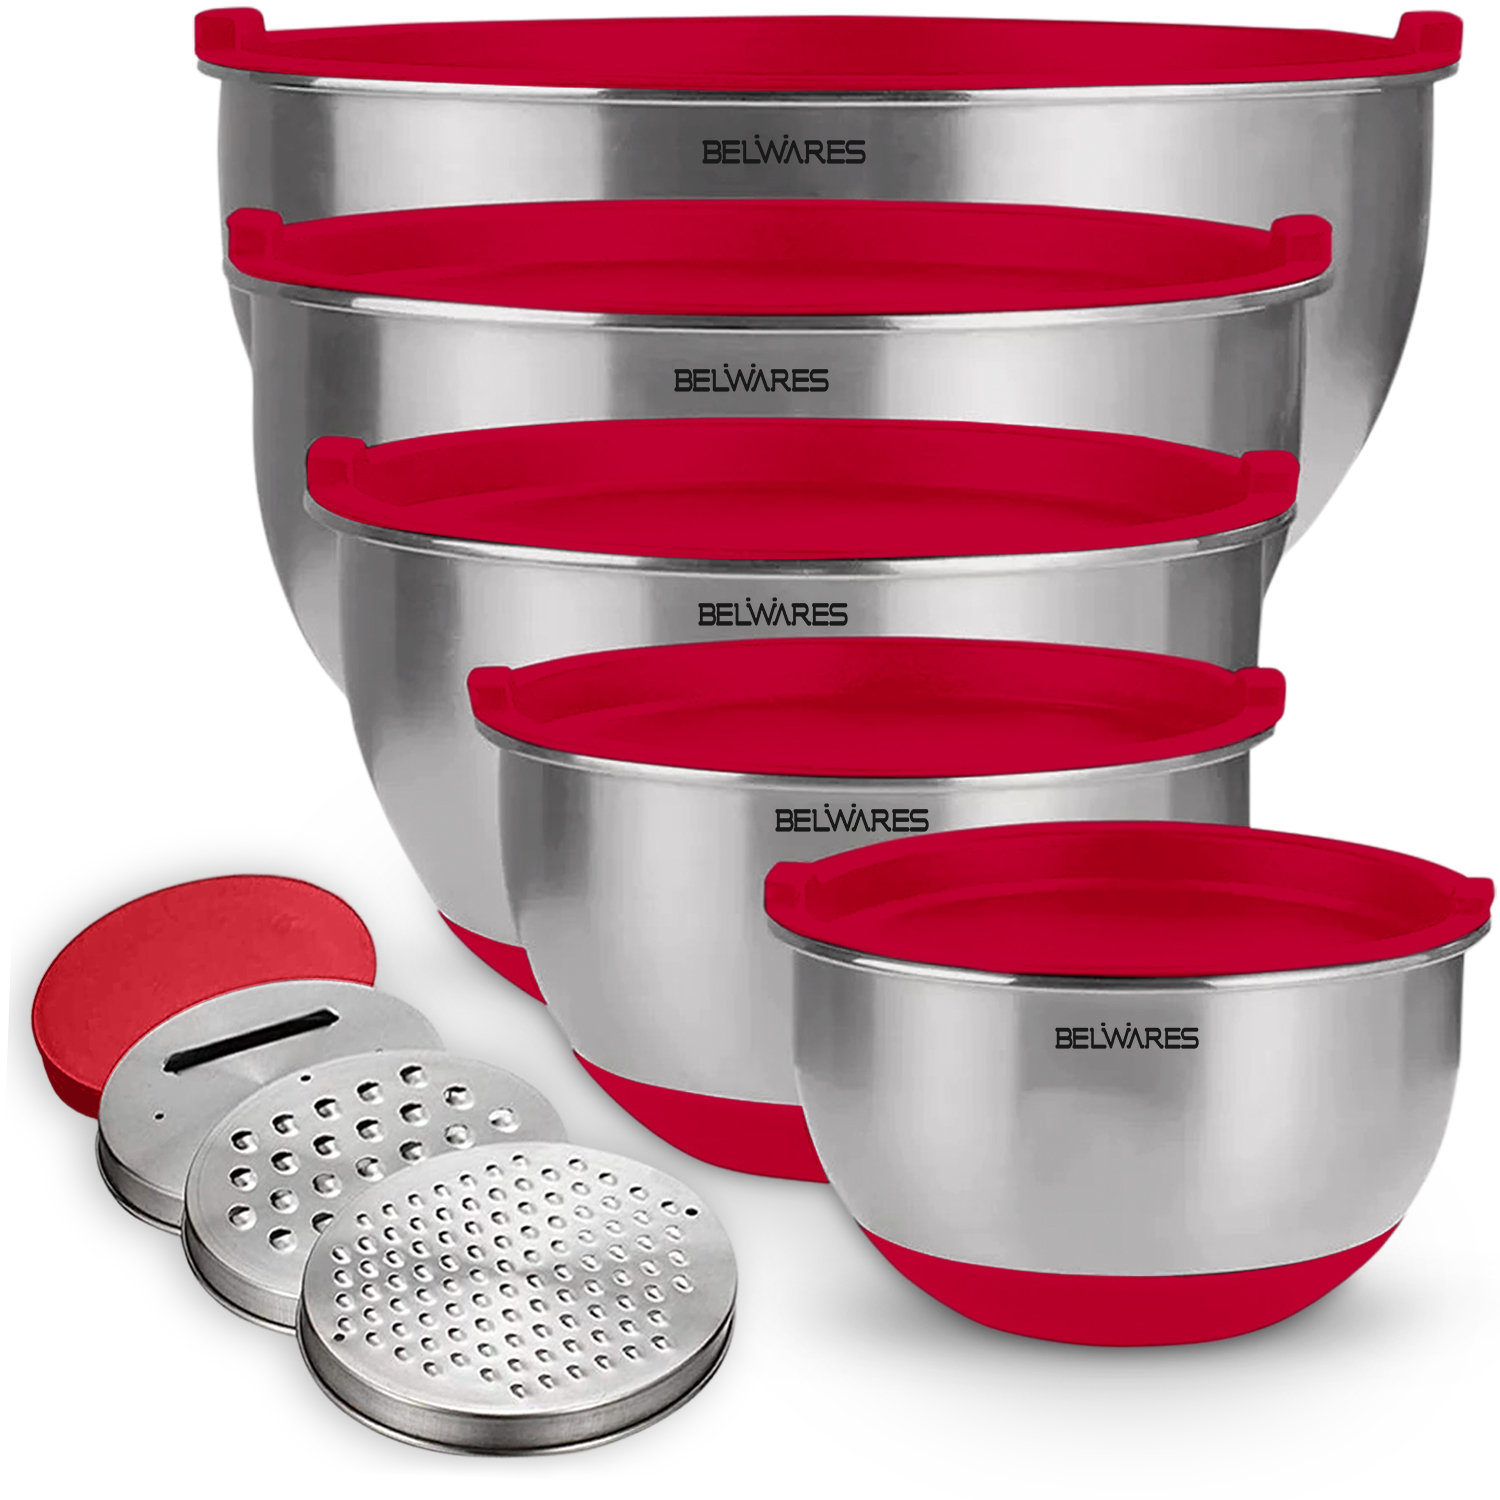 Belwares Mixing Bowls with Lids Set - Nesting Bowls with Graters, Handle,  Pour Spout, Airtight Lids - Stainless Steel Non-Slip Mixing Bowl for